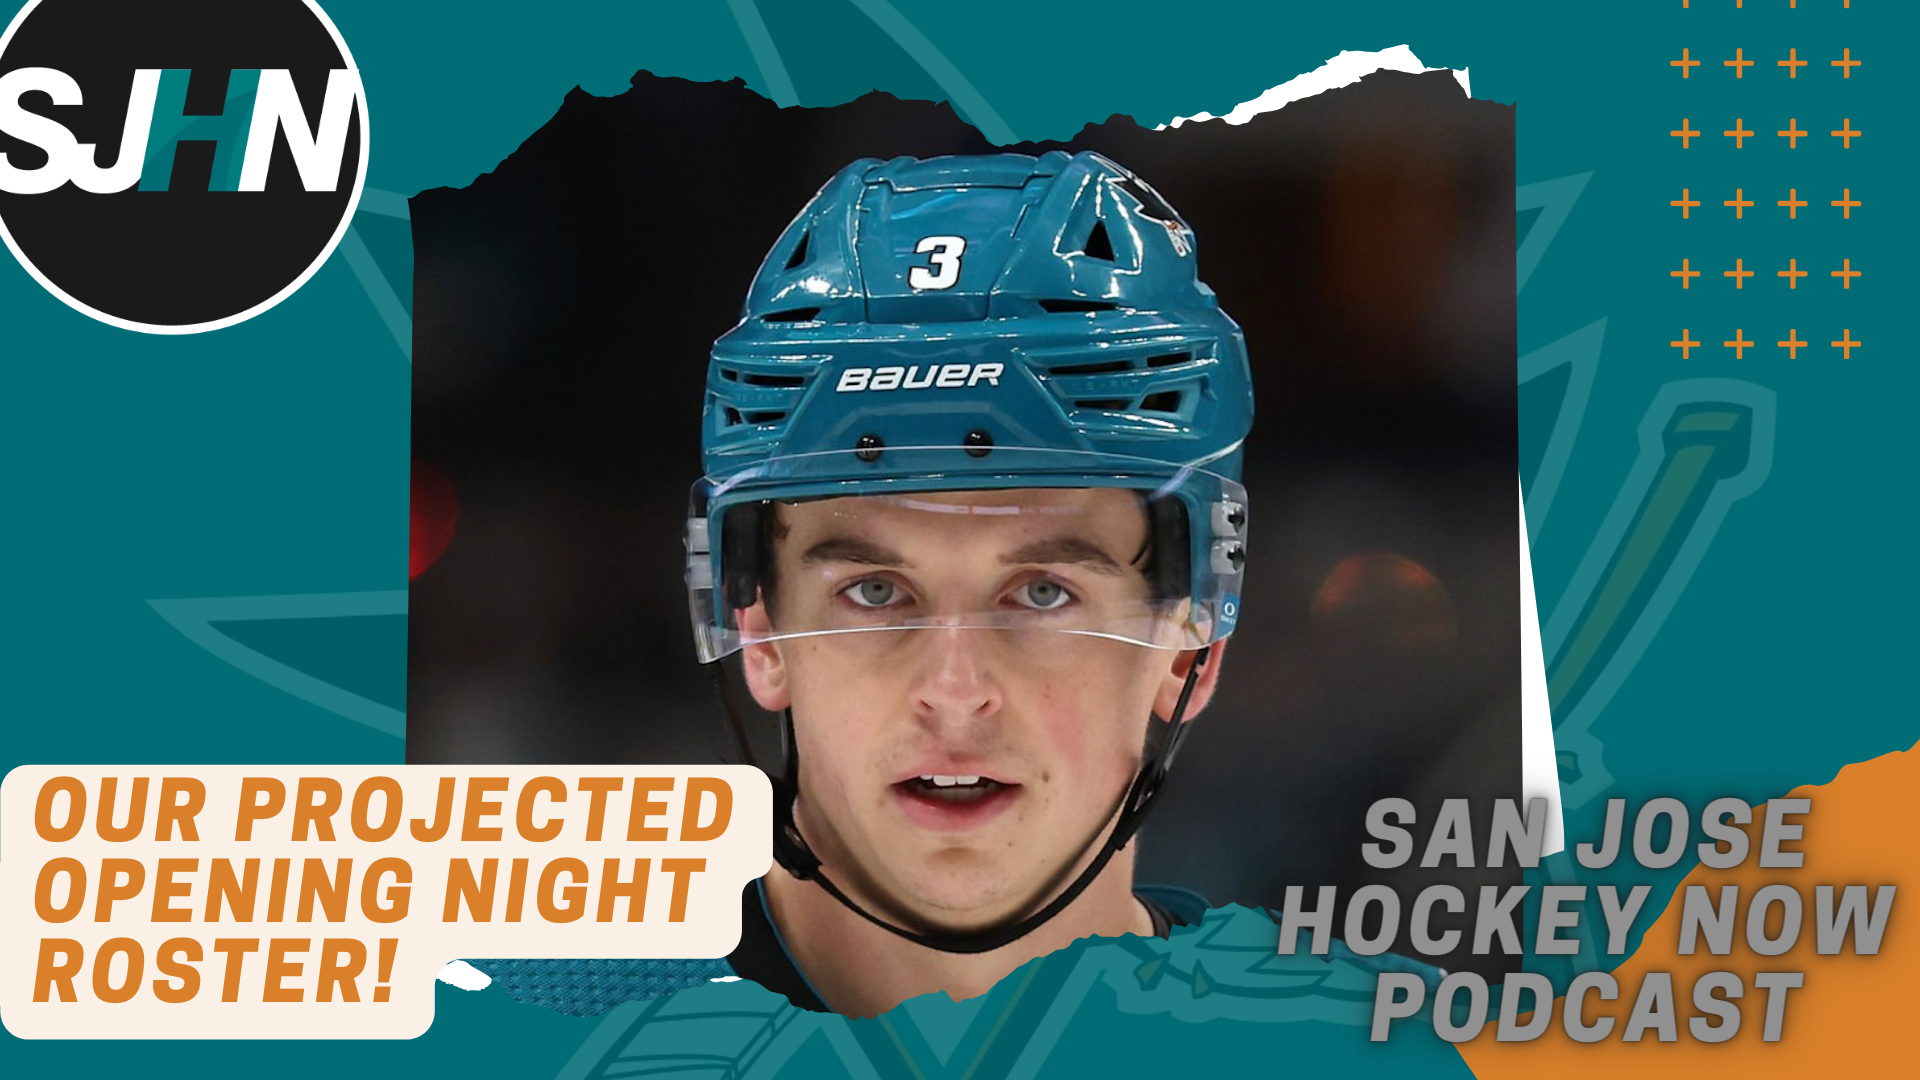 Here's the latest on San Jose Sharks team direction